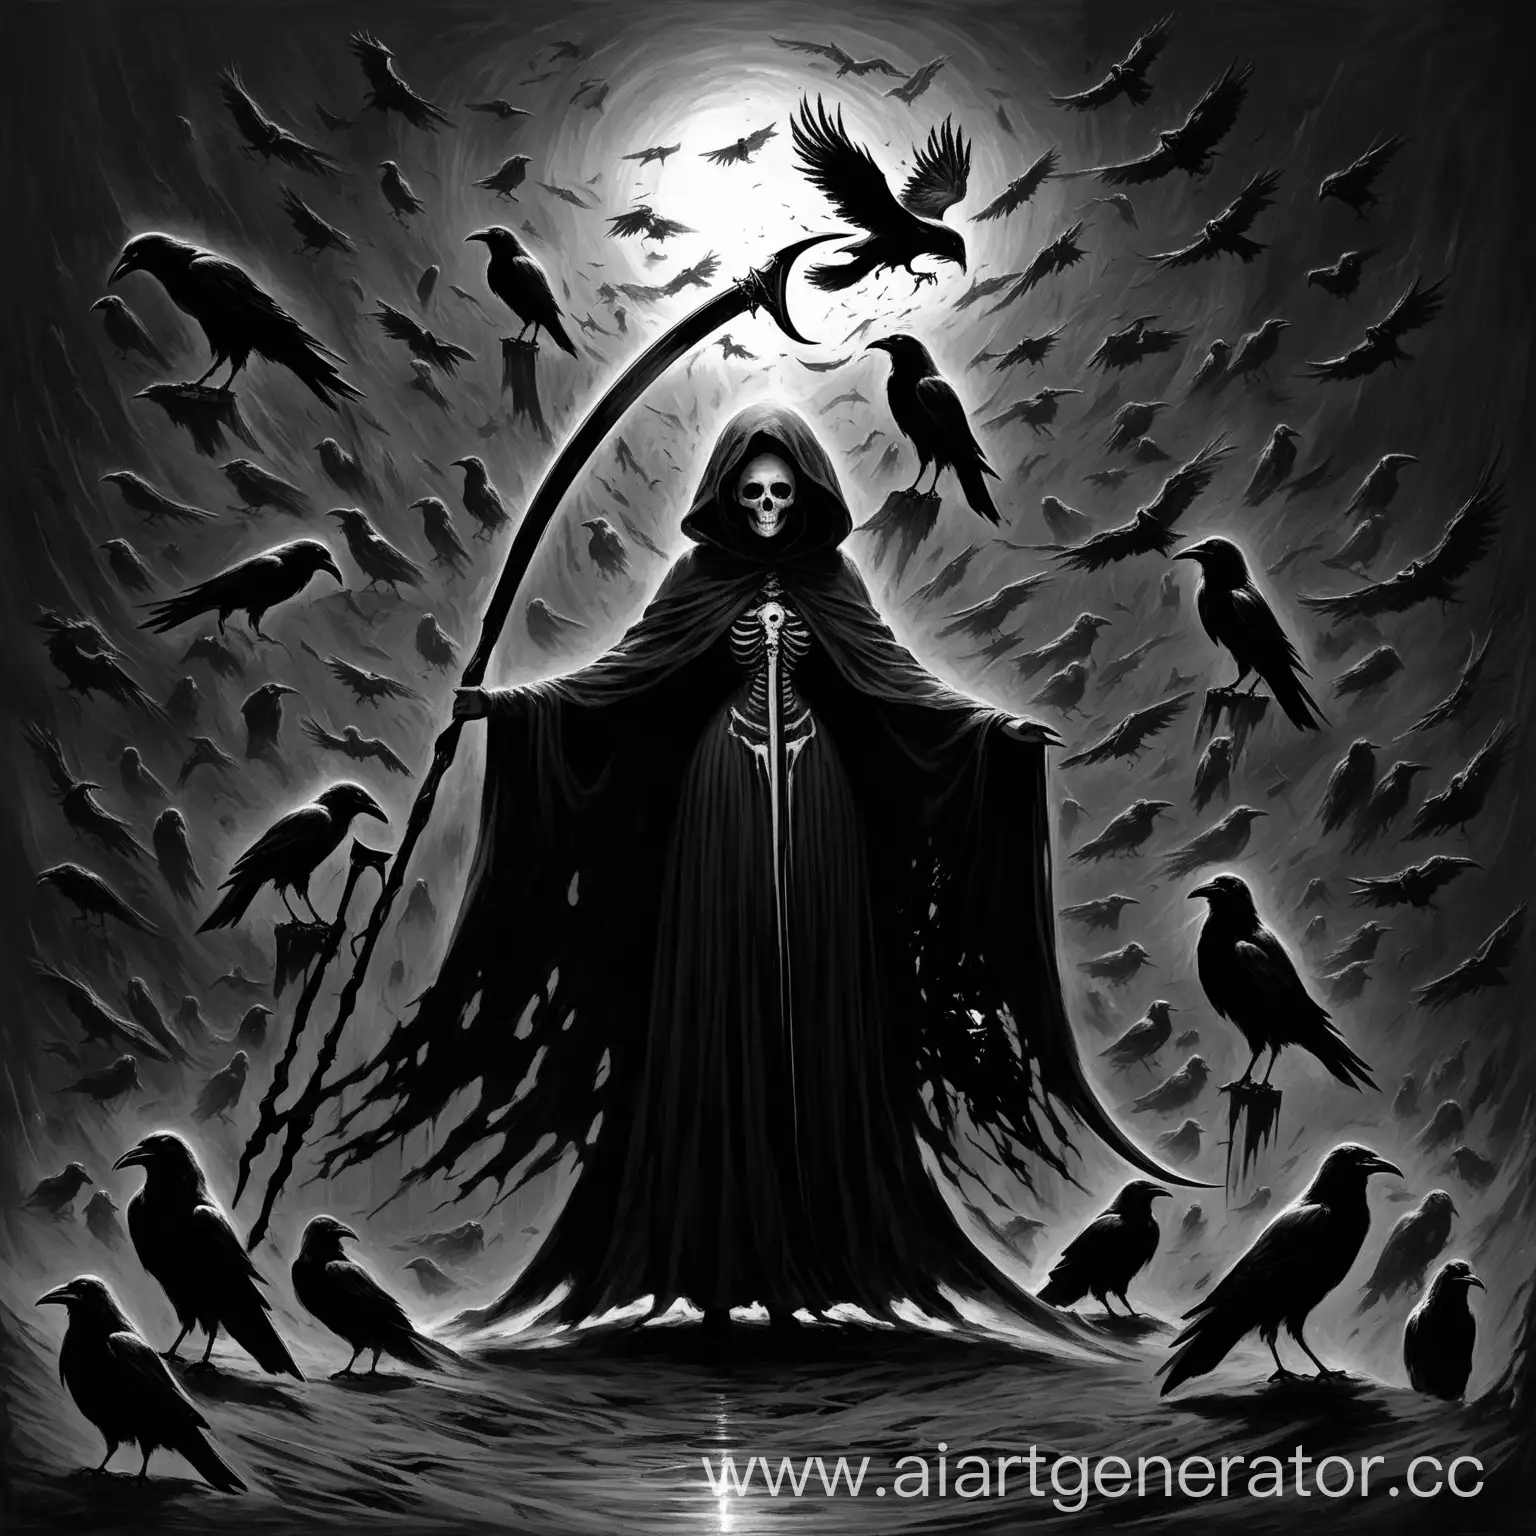 Mysterious-Death-with-Scythe-in-Monochrome-Painting